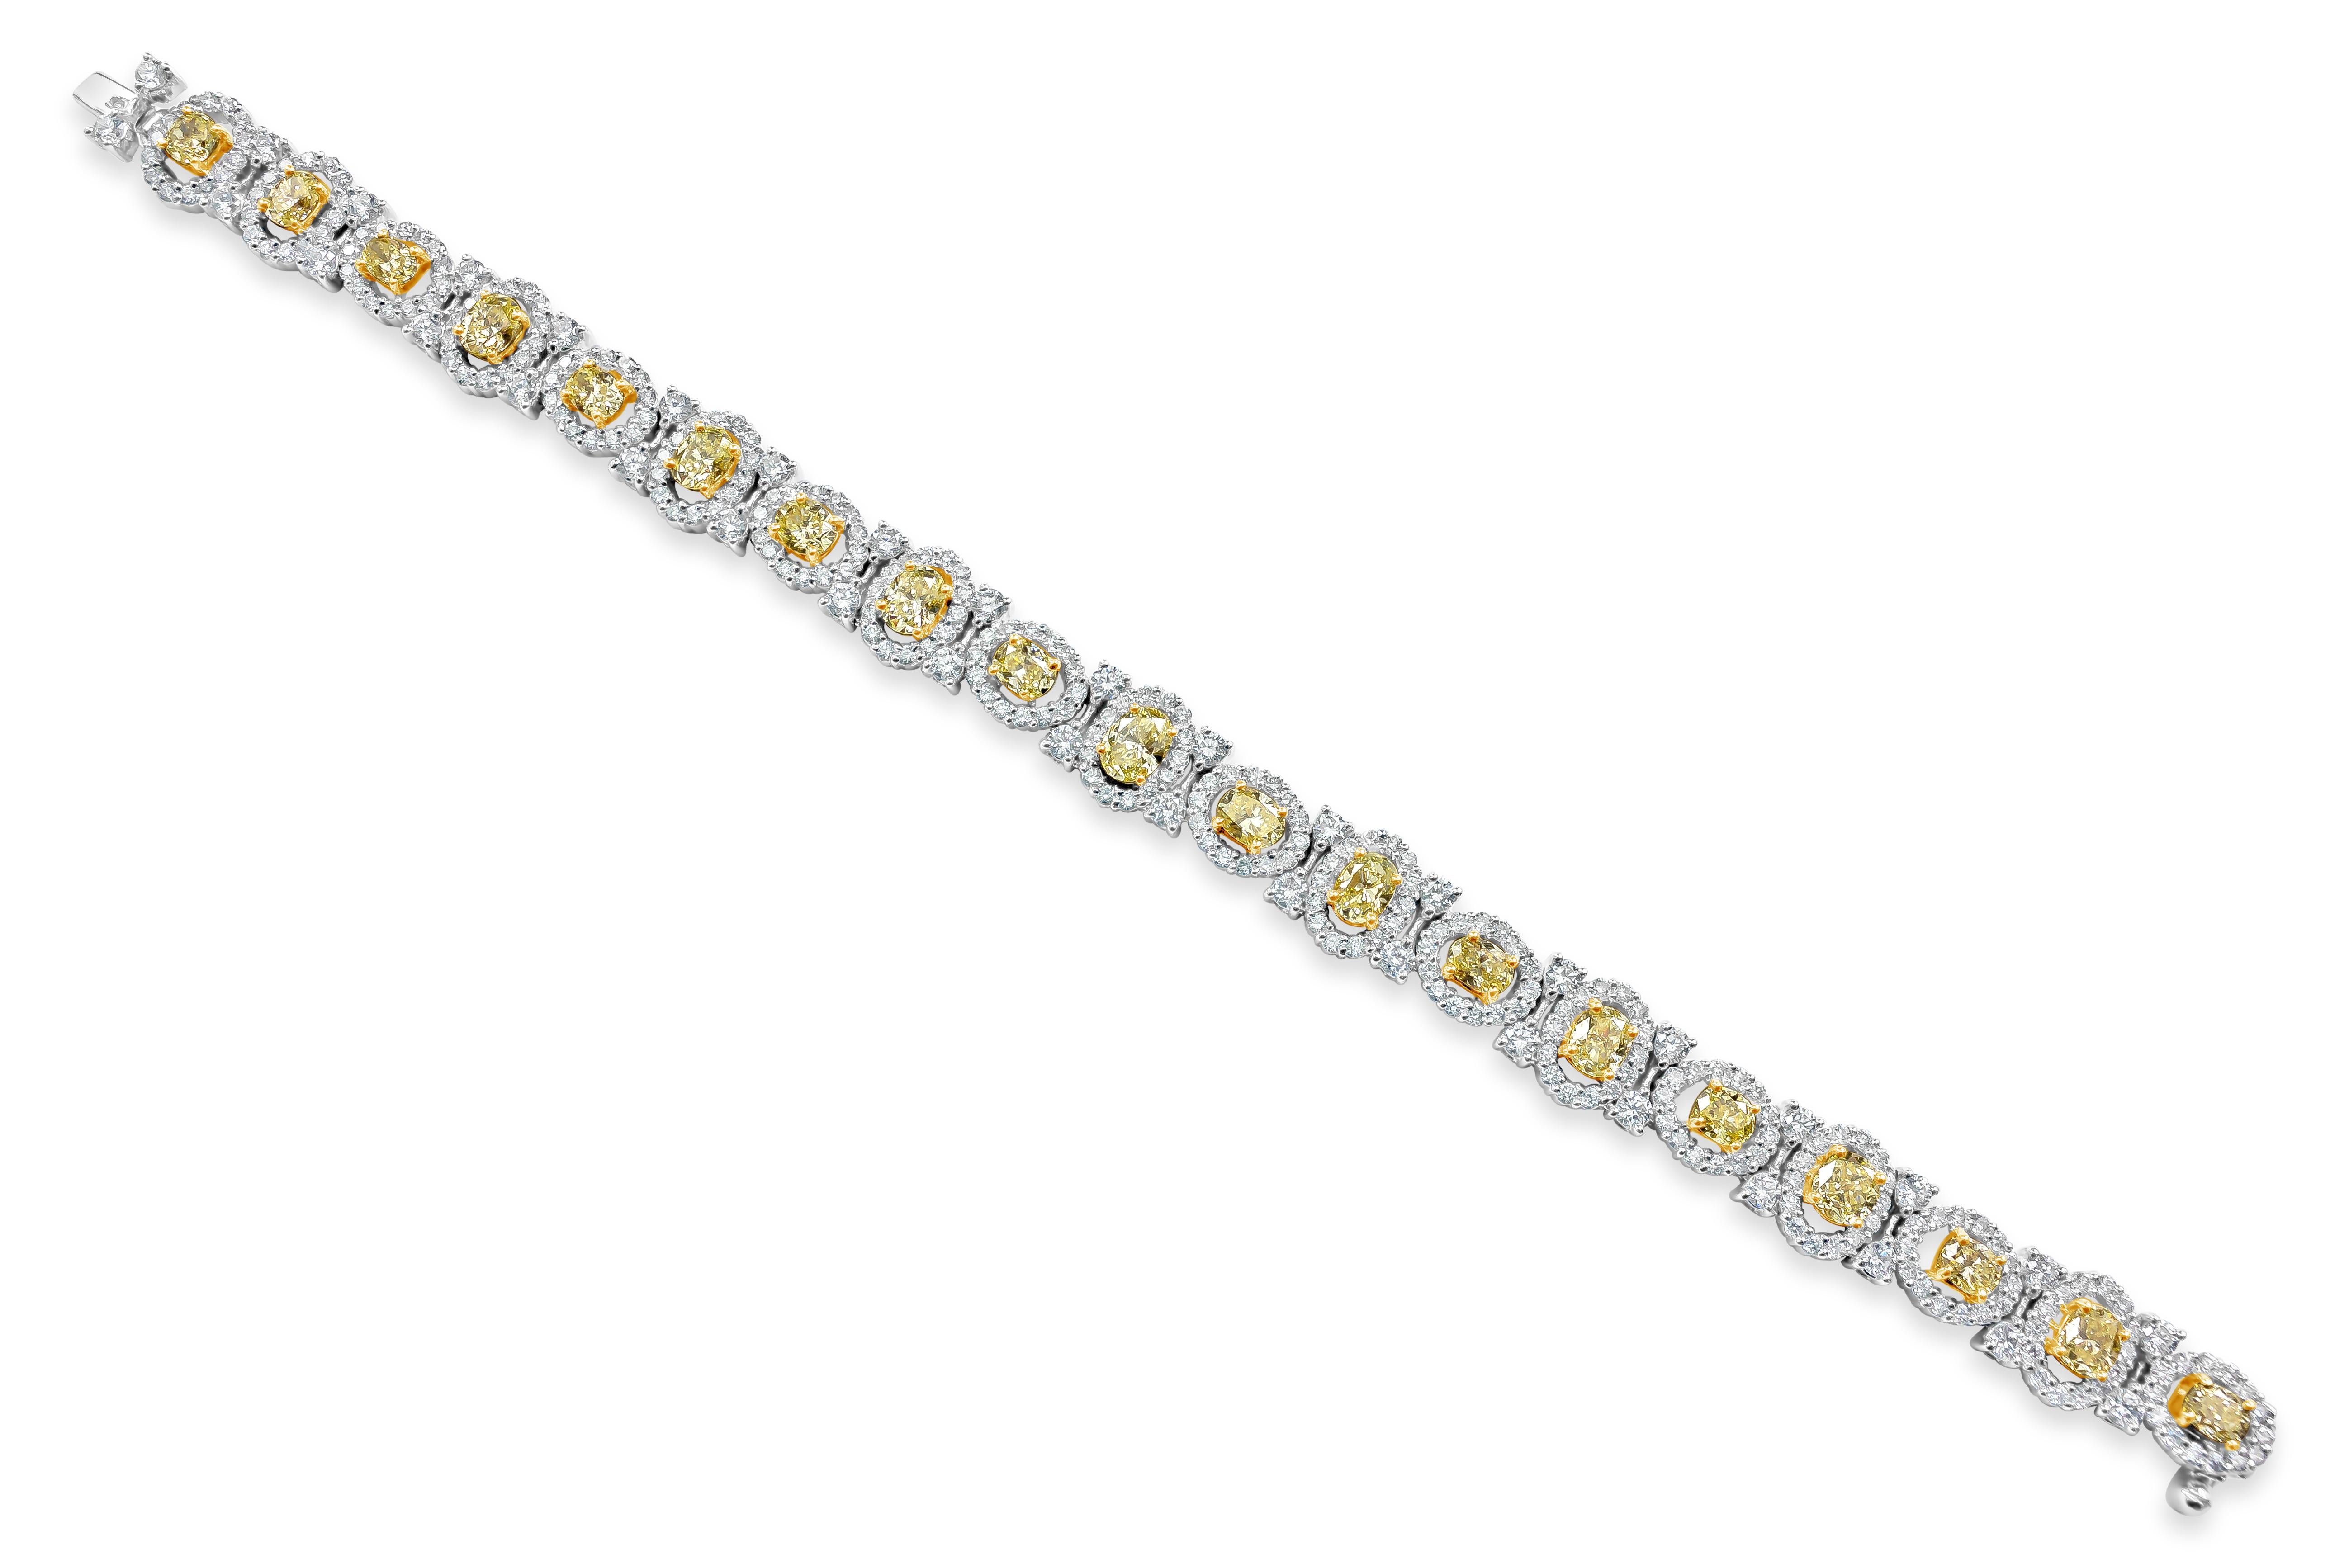 An elegant piece of jewelry beautifully showcasing 19 fancy yellow oval cut diamonds set in an open-work halo accented with round brilliant diamonds. Fancy yellow diamonds weigh 6.21 carats total; accent diamonds weigh 5.29 carats total. Made in 18K